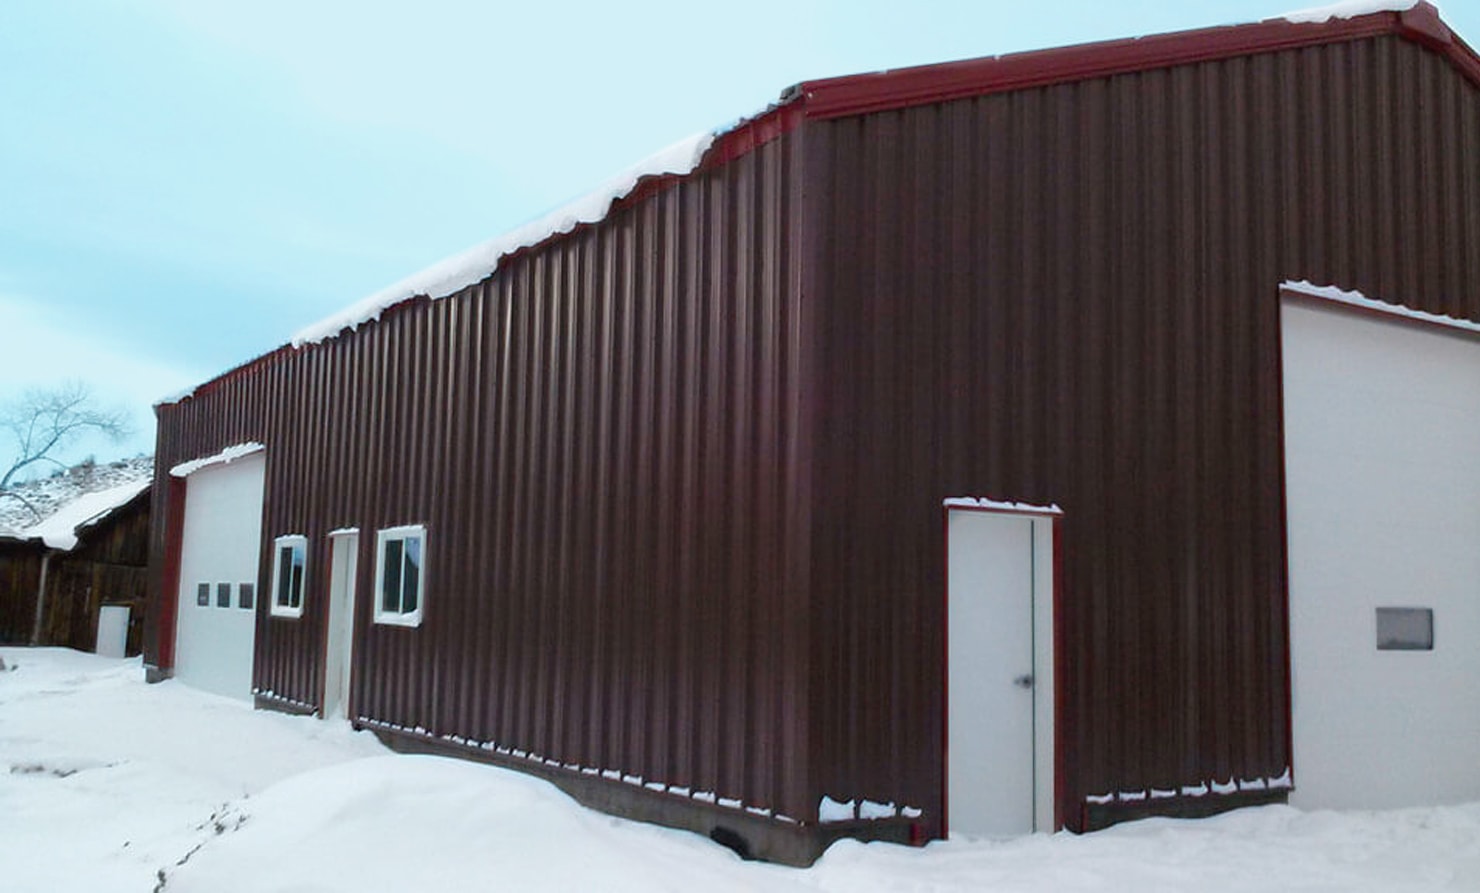 Steel Buildings Are Engineered for Snow Wind and Seismic Activity